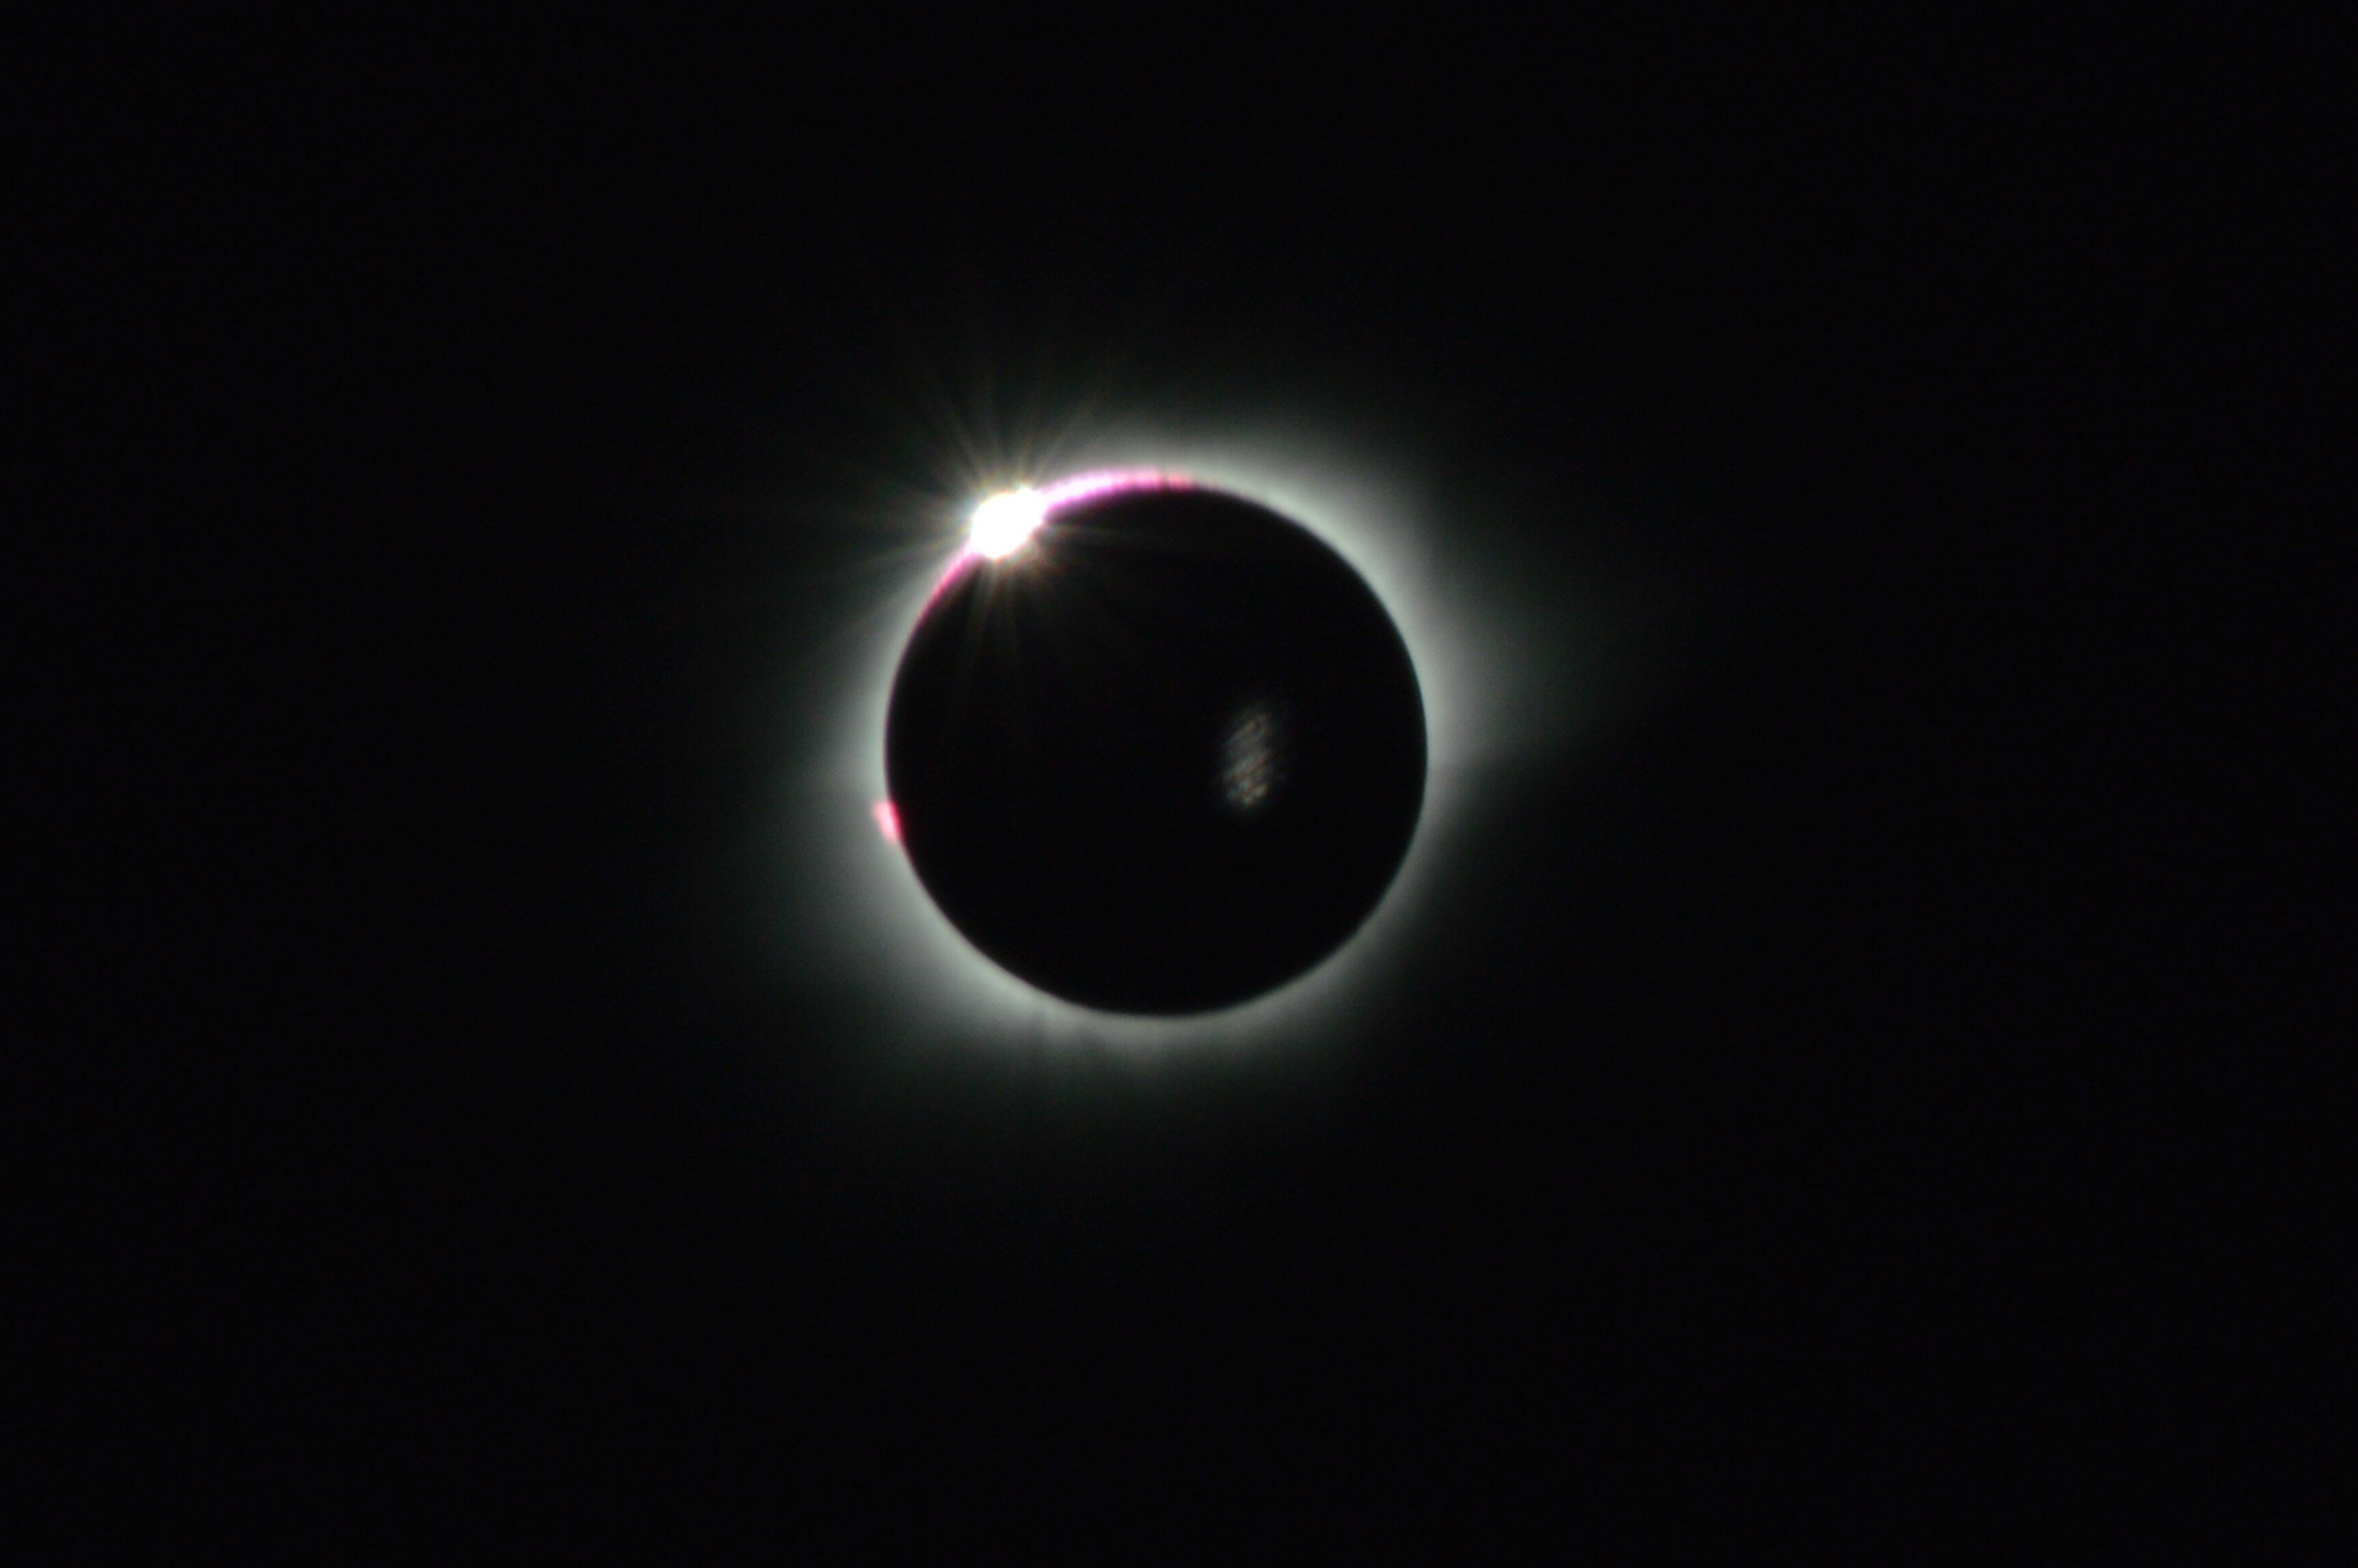 DONGGALA, CENTRAL SULAWESI, INDONESIA - 2016/03/09: A view of the total solar eclipse captured from Donggala. The total eclipse starts over the Indian Ocean, made landfall across Indonesia, including Sumatra, Borneo, and Sulawesi, Teluk Tomini and Halmahera in the Moluccas and then headed out over the north Pacific Ocean, to ended near the Hawaiian islands. (Photo by Bambang Prastowo/Pacific Press/LightRocket via Getty Images)